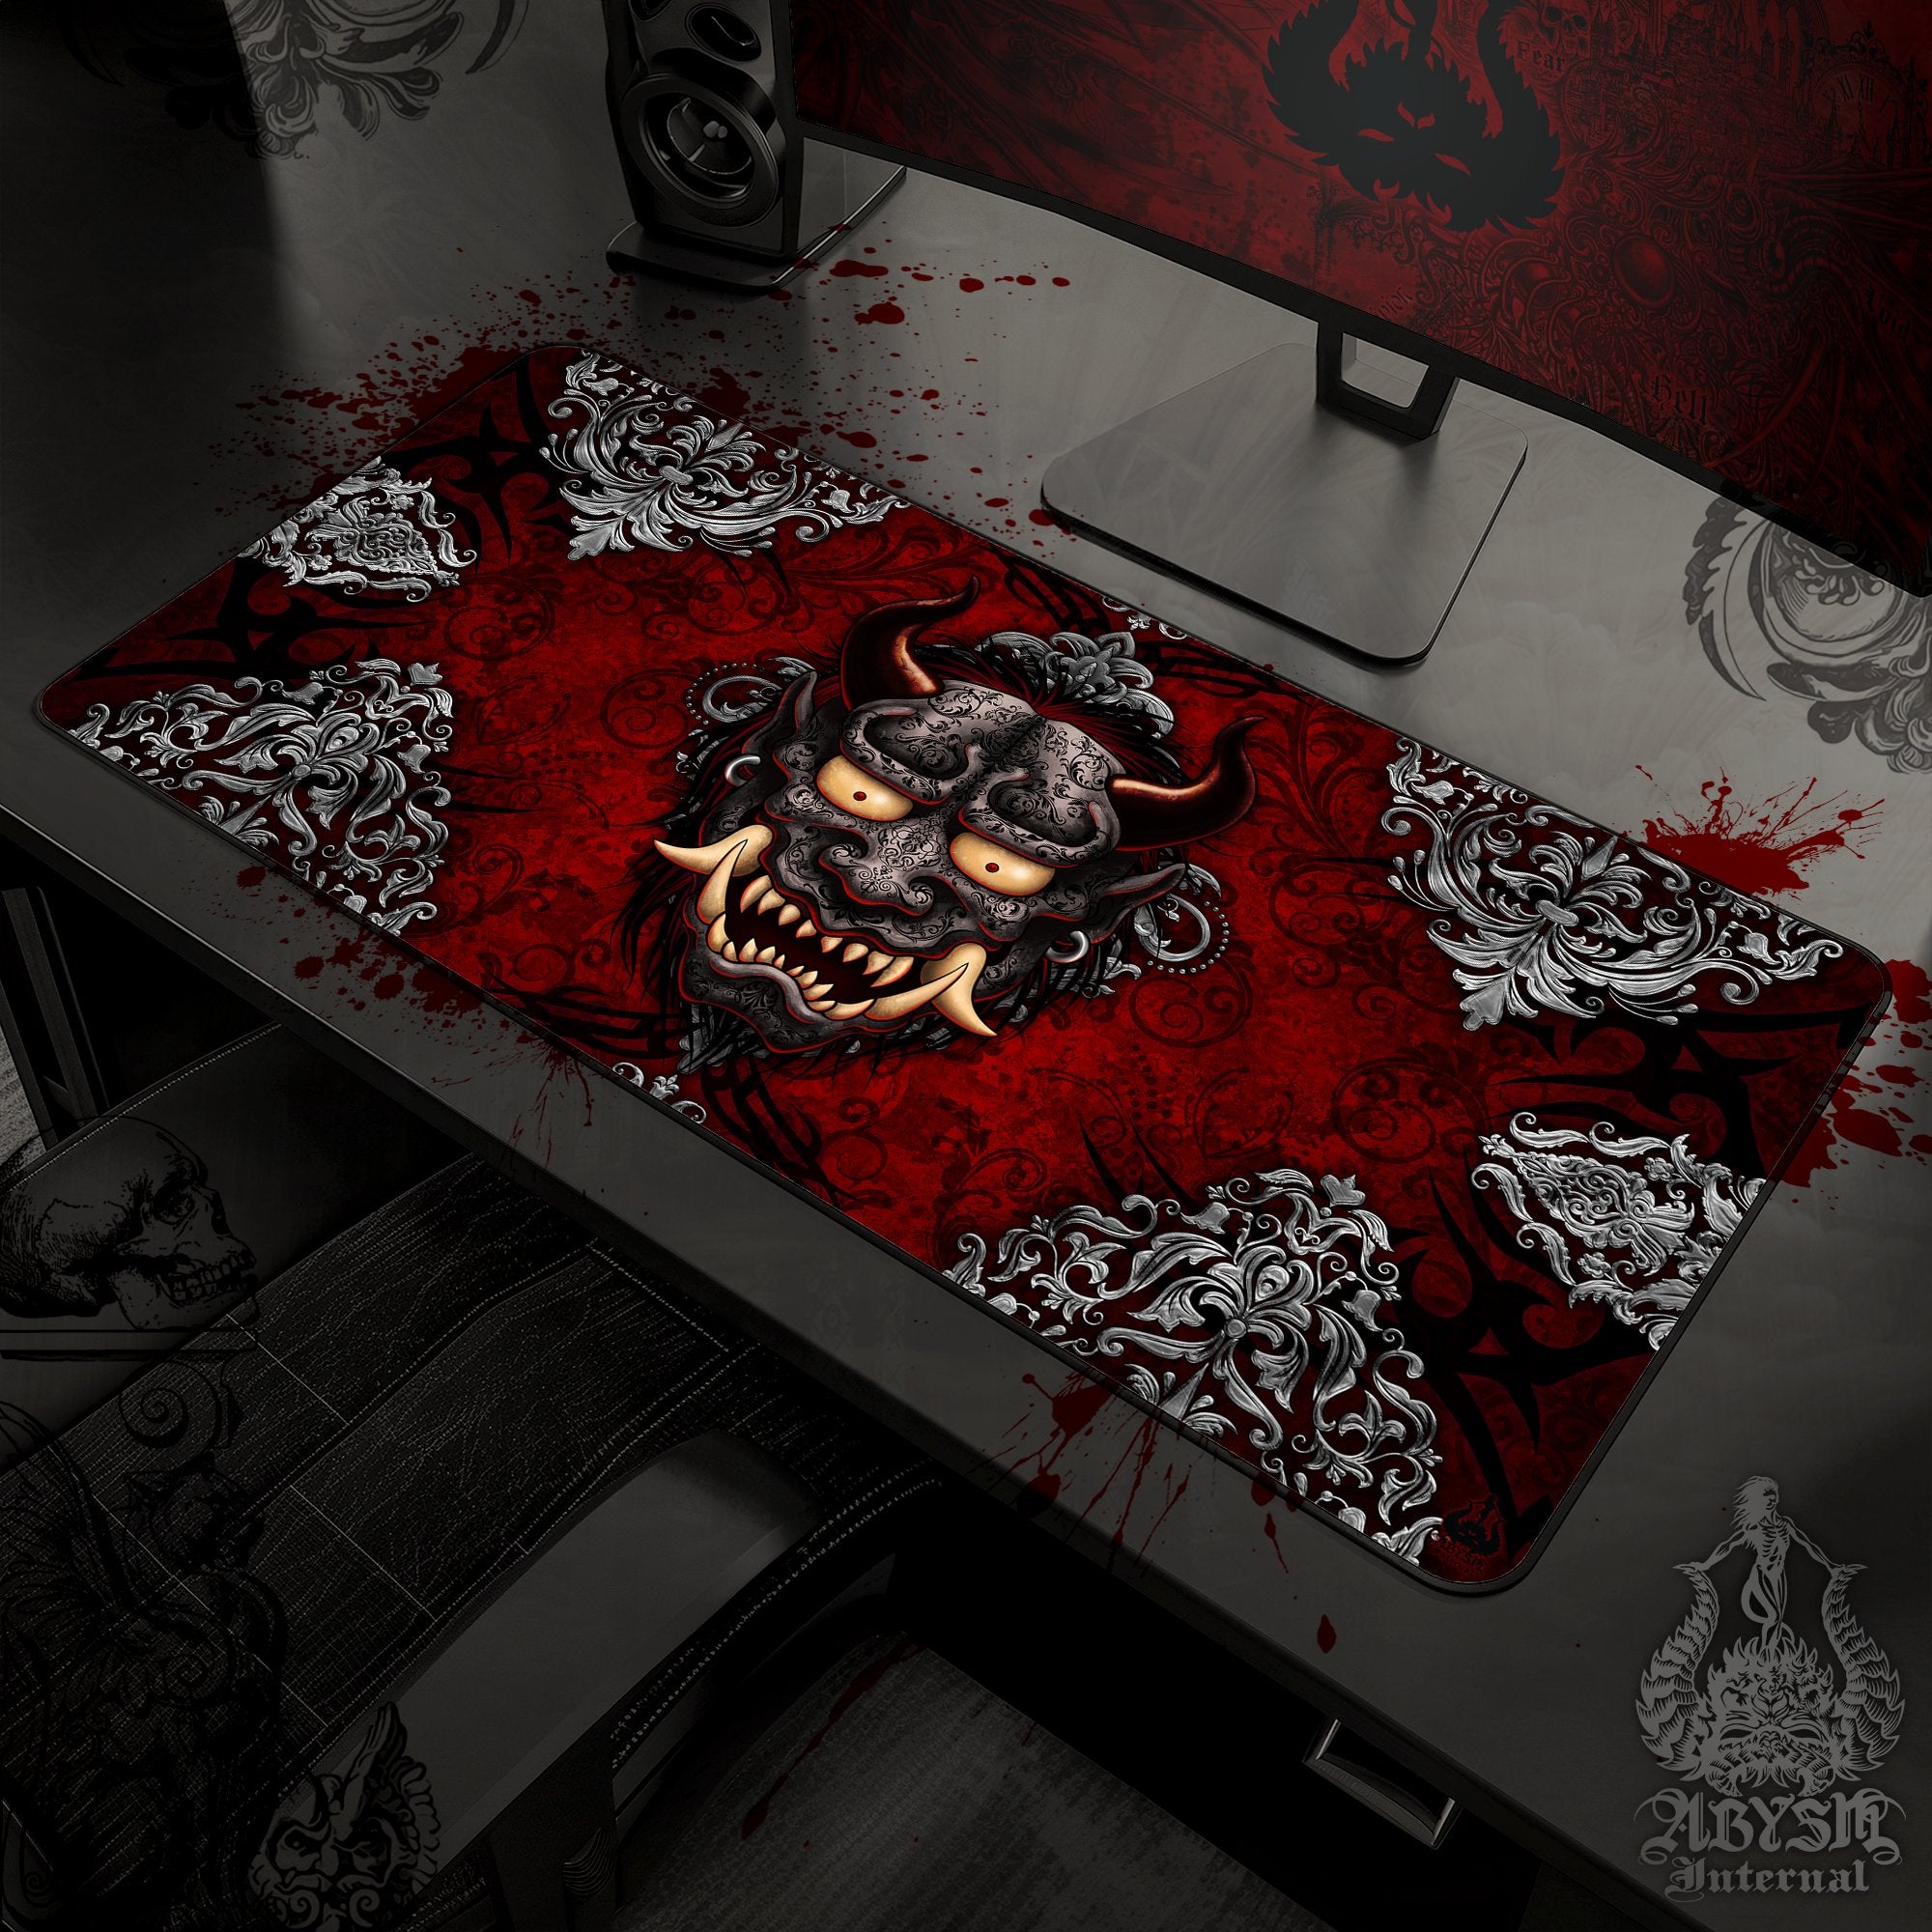 Gothic Oni Desk Mat, Japanese Demon Gaming Mouse Pad, Gamer Table Protector Cover, Goth Workpad, Anime Yokai Art Print - Abysm Internal